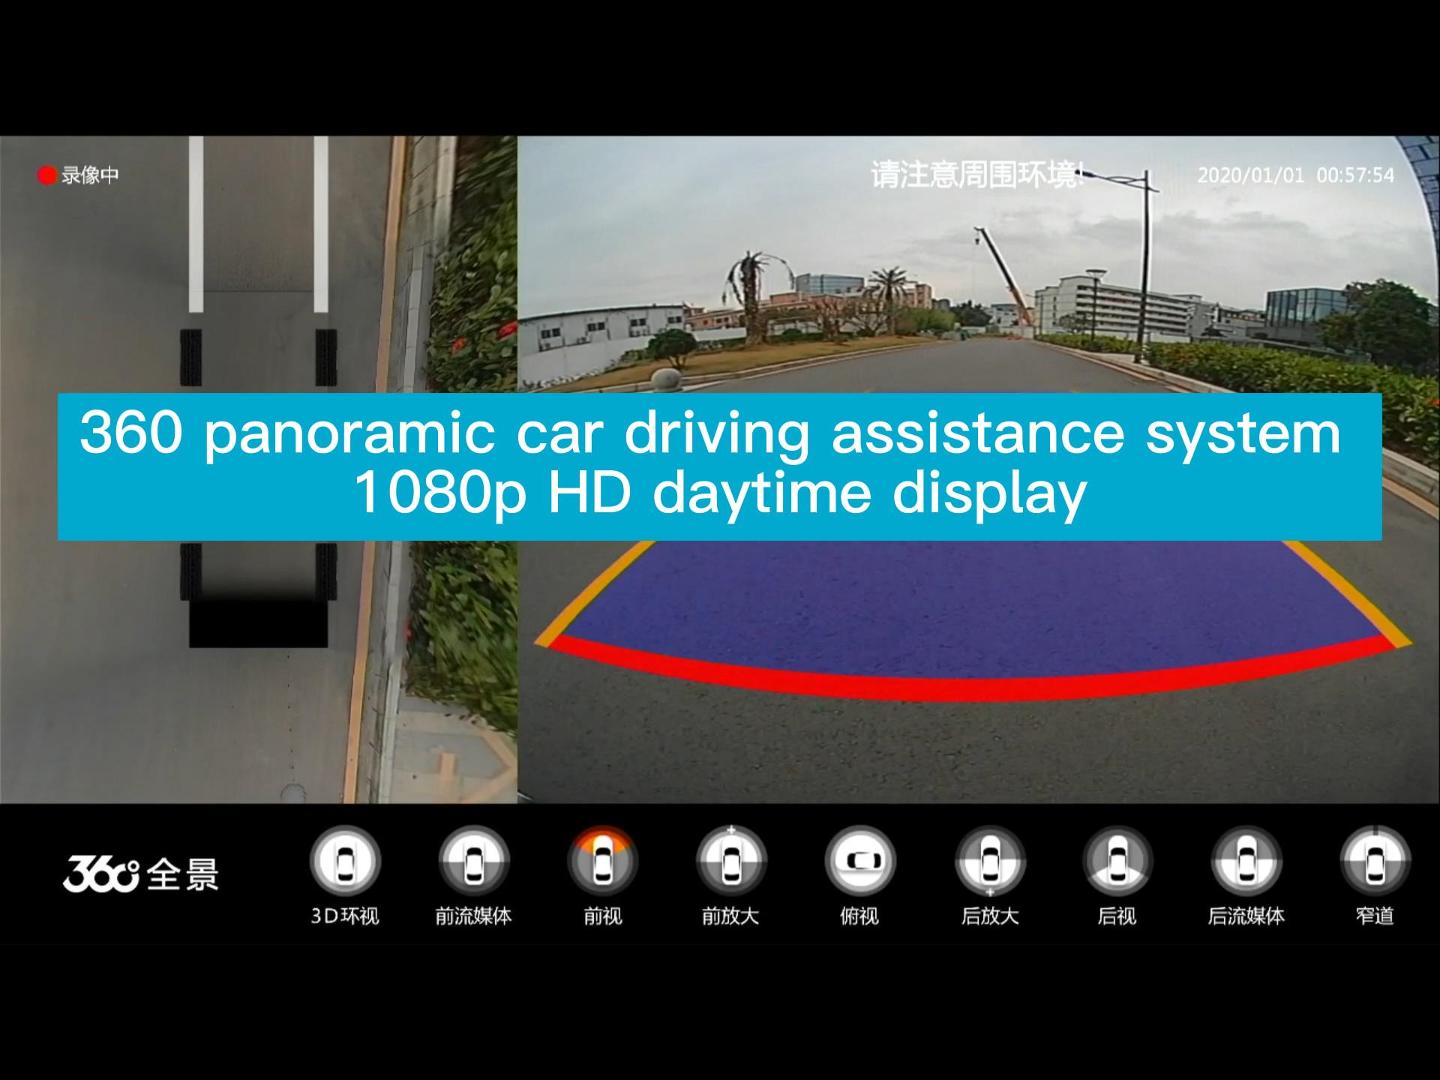 360panoramic car driving assistance system1080p HD